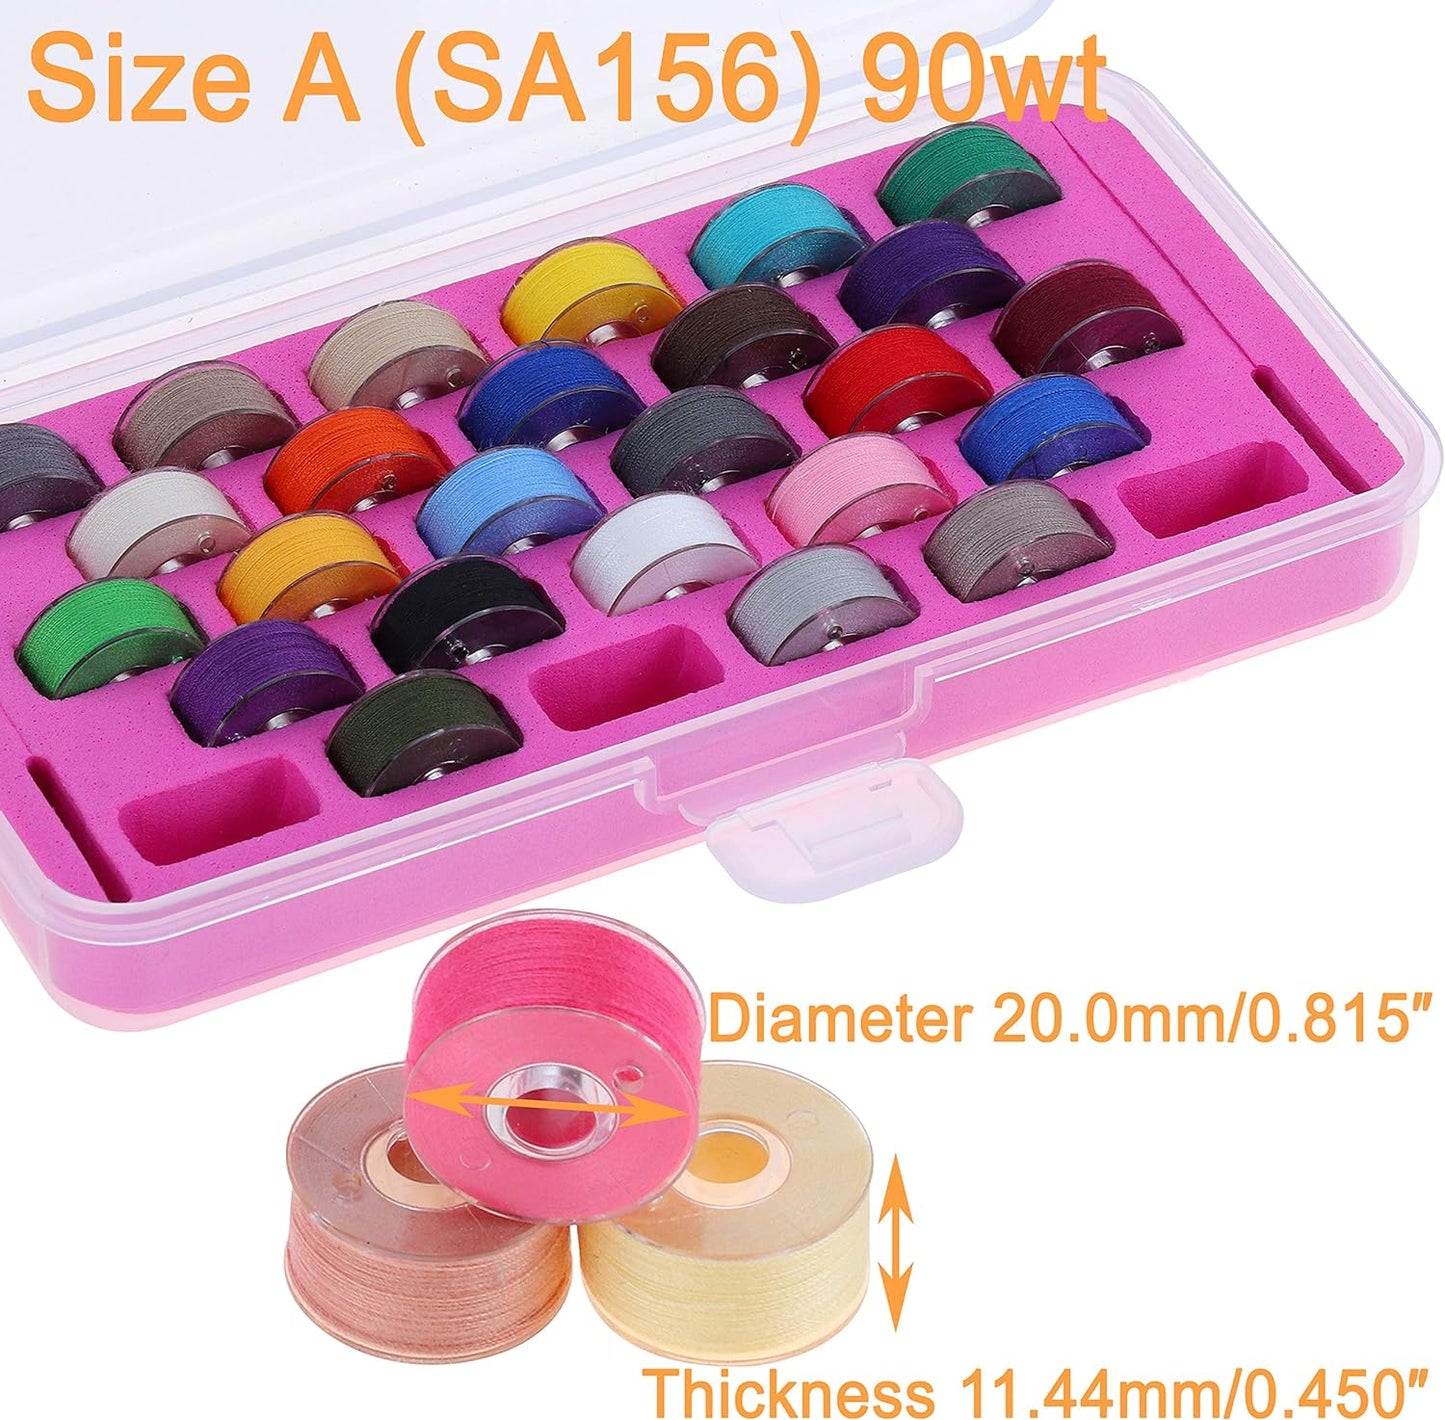 28Pcs Assorted Colors 60S/2 (90WT) Prewound Bobbin Thread Plastic Size a SA156 for Embroidery and Sewing Machines DIY Embroidery Thread Sewing Thread